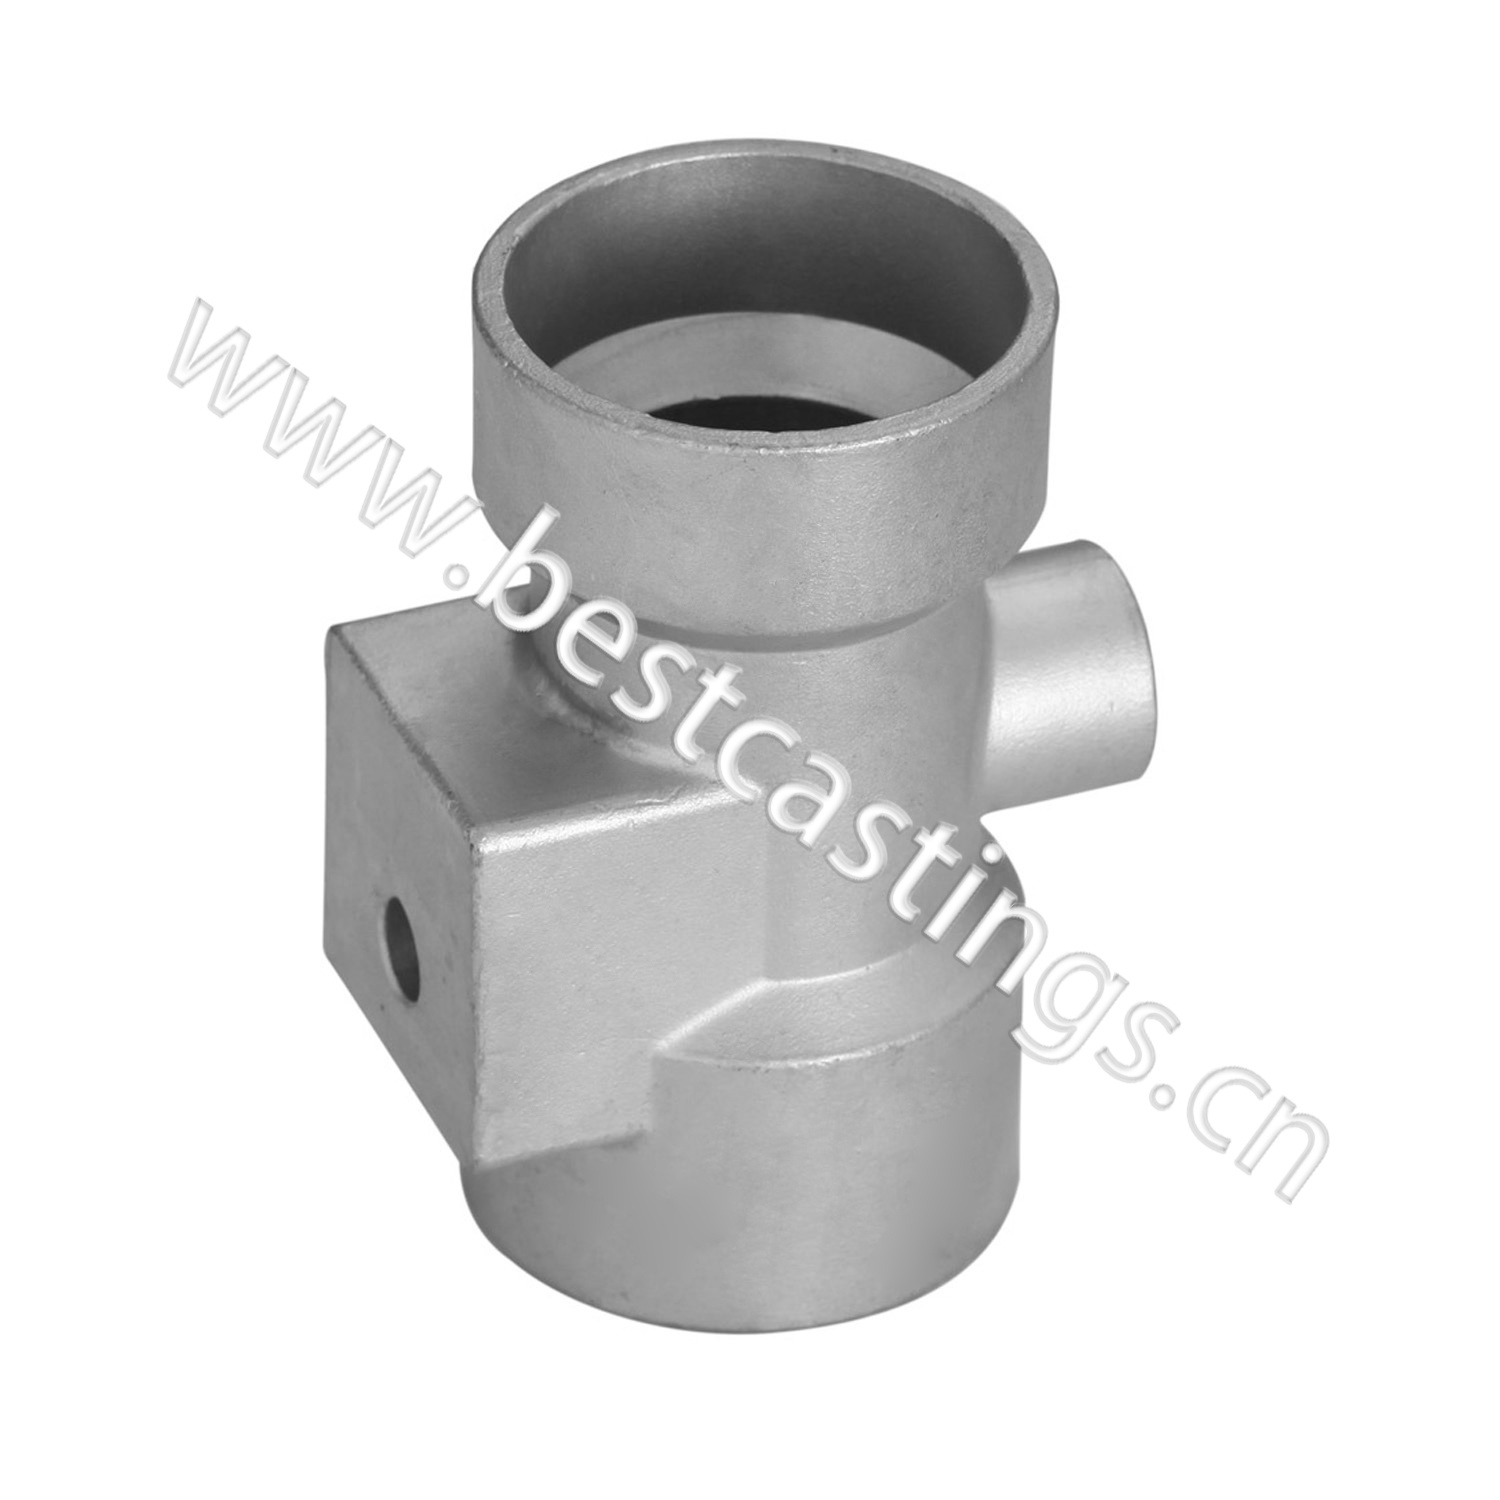 Precision cast iron joint